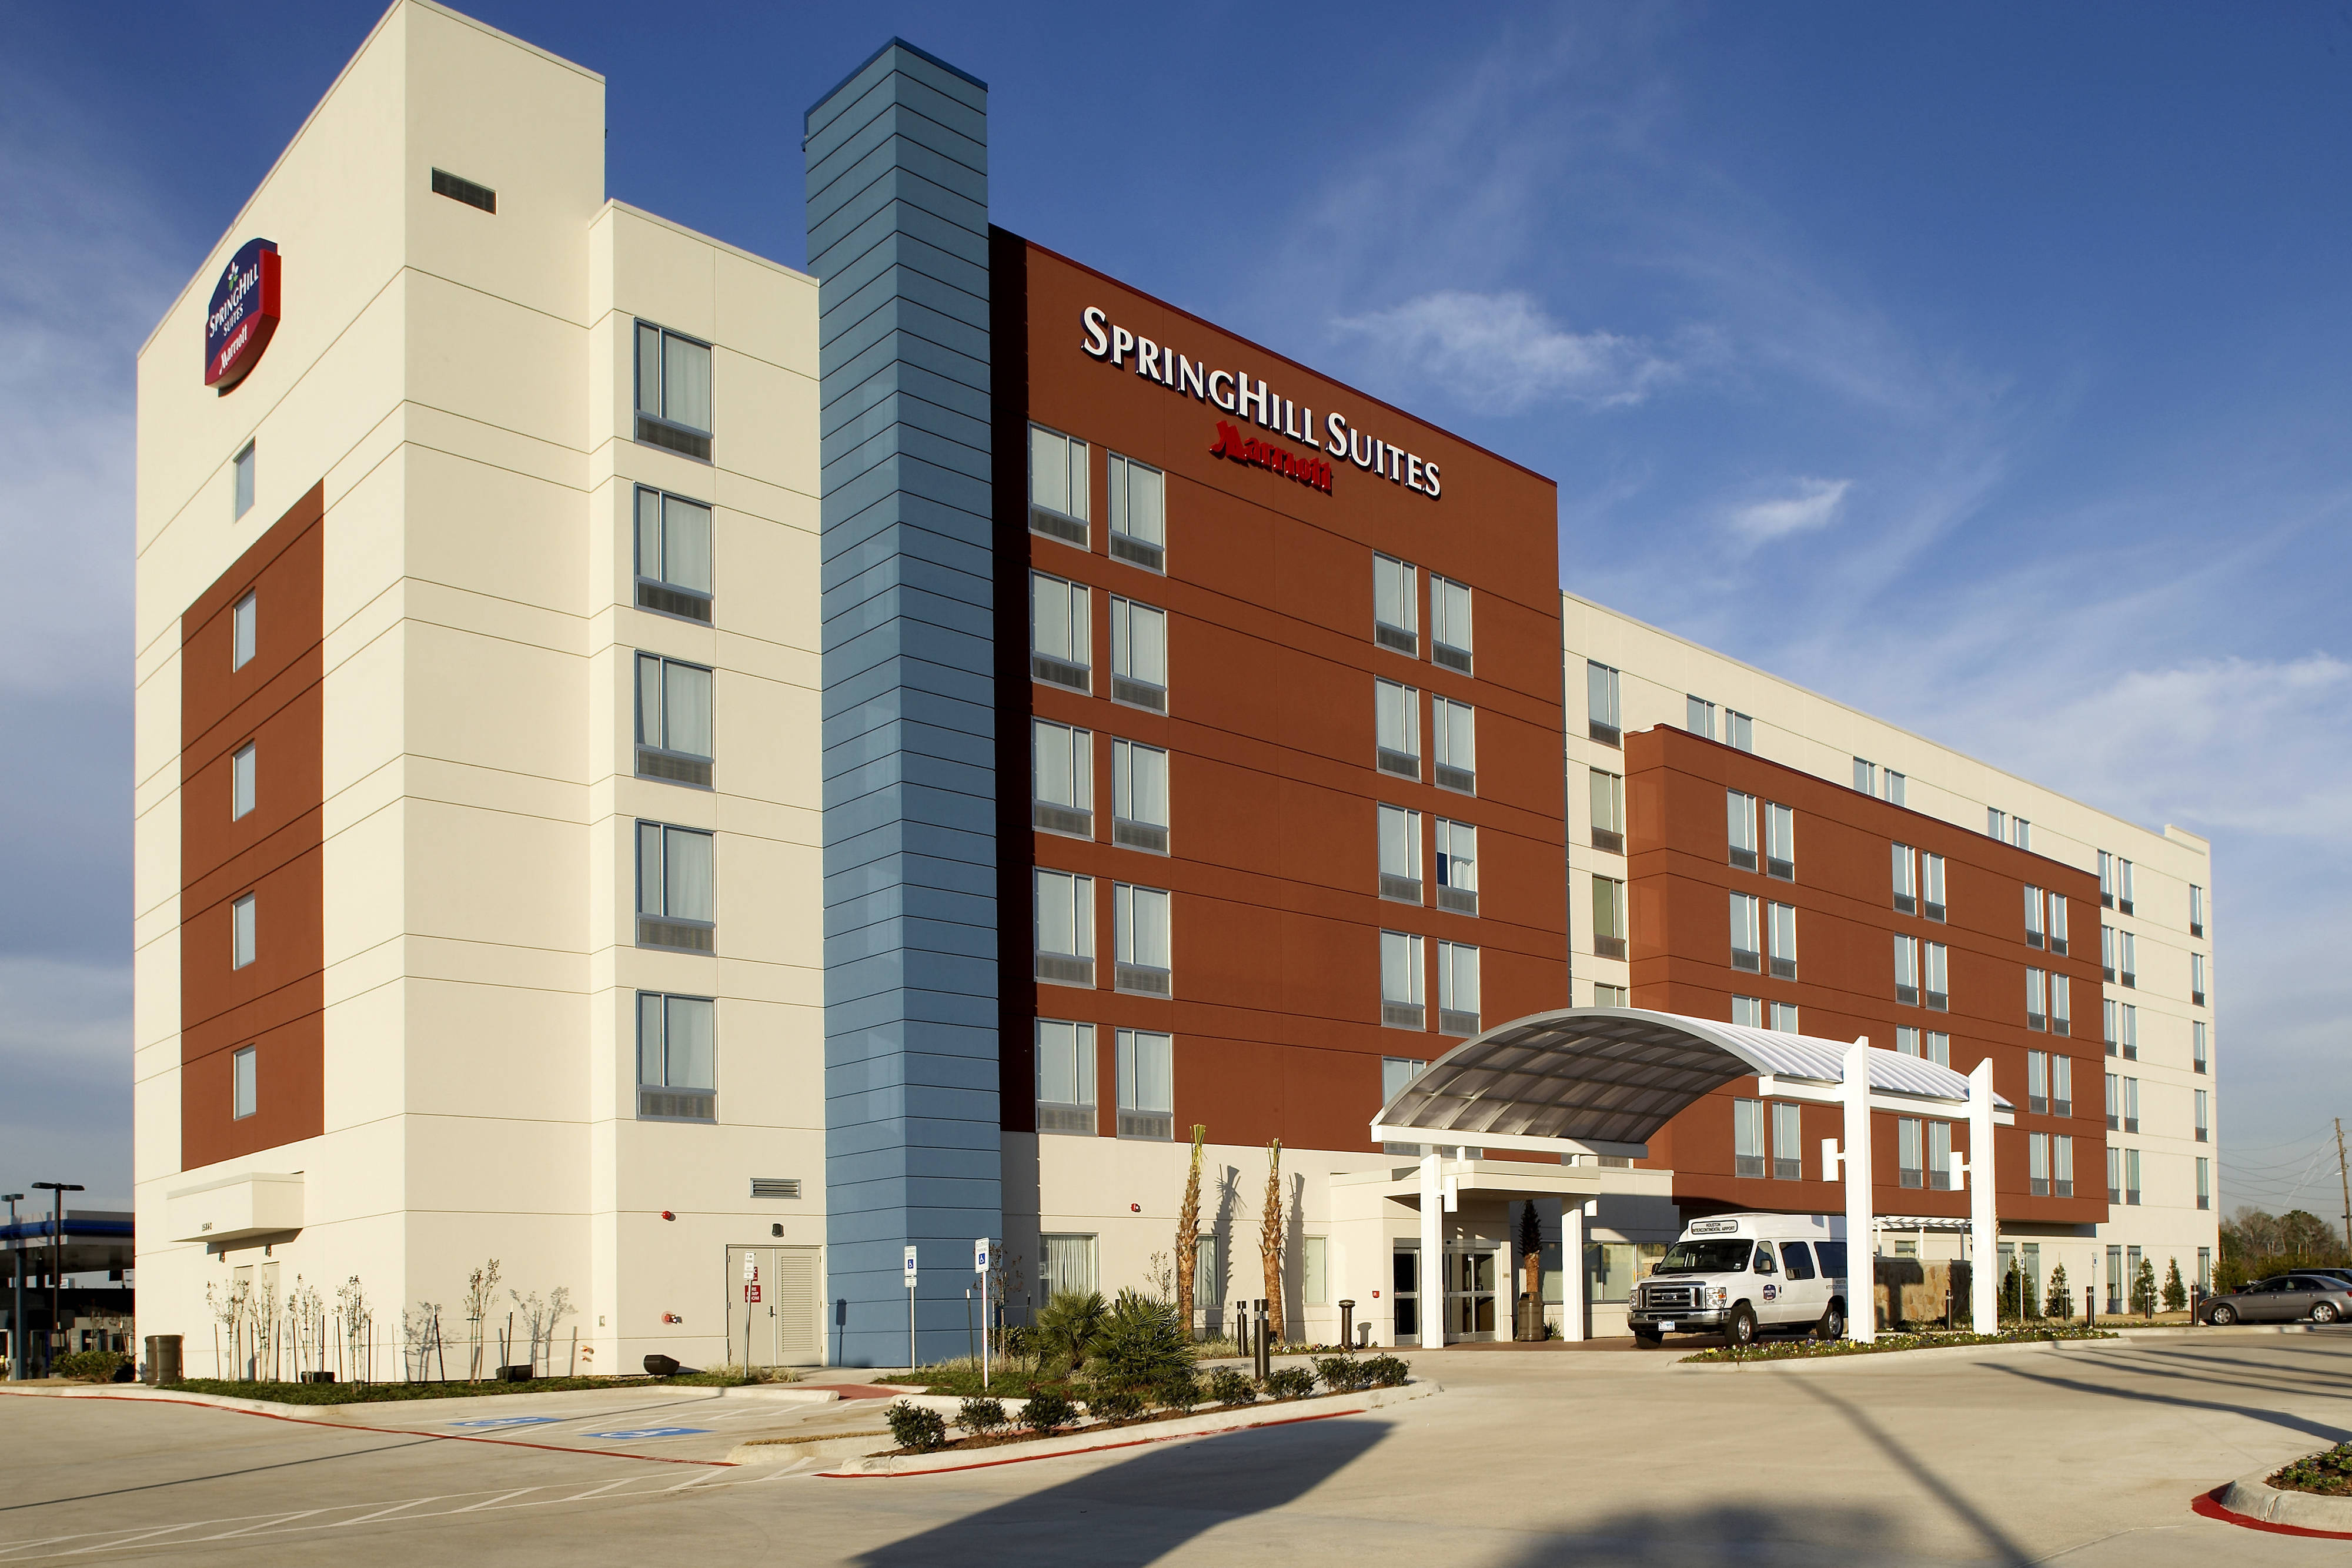 Photo of SpringHill Suites Houston Intercontinental Airport, Houston, TX